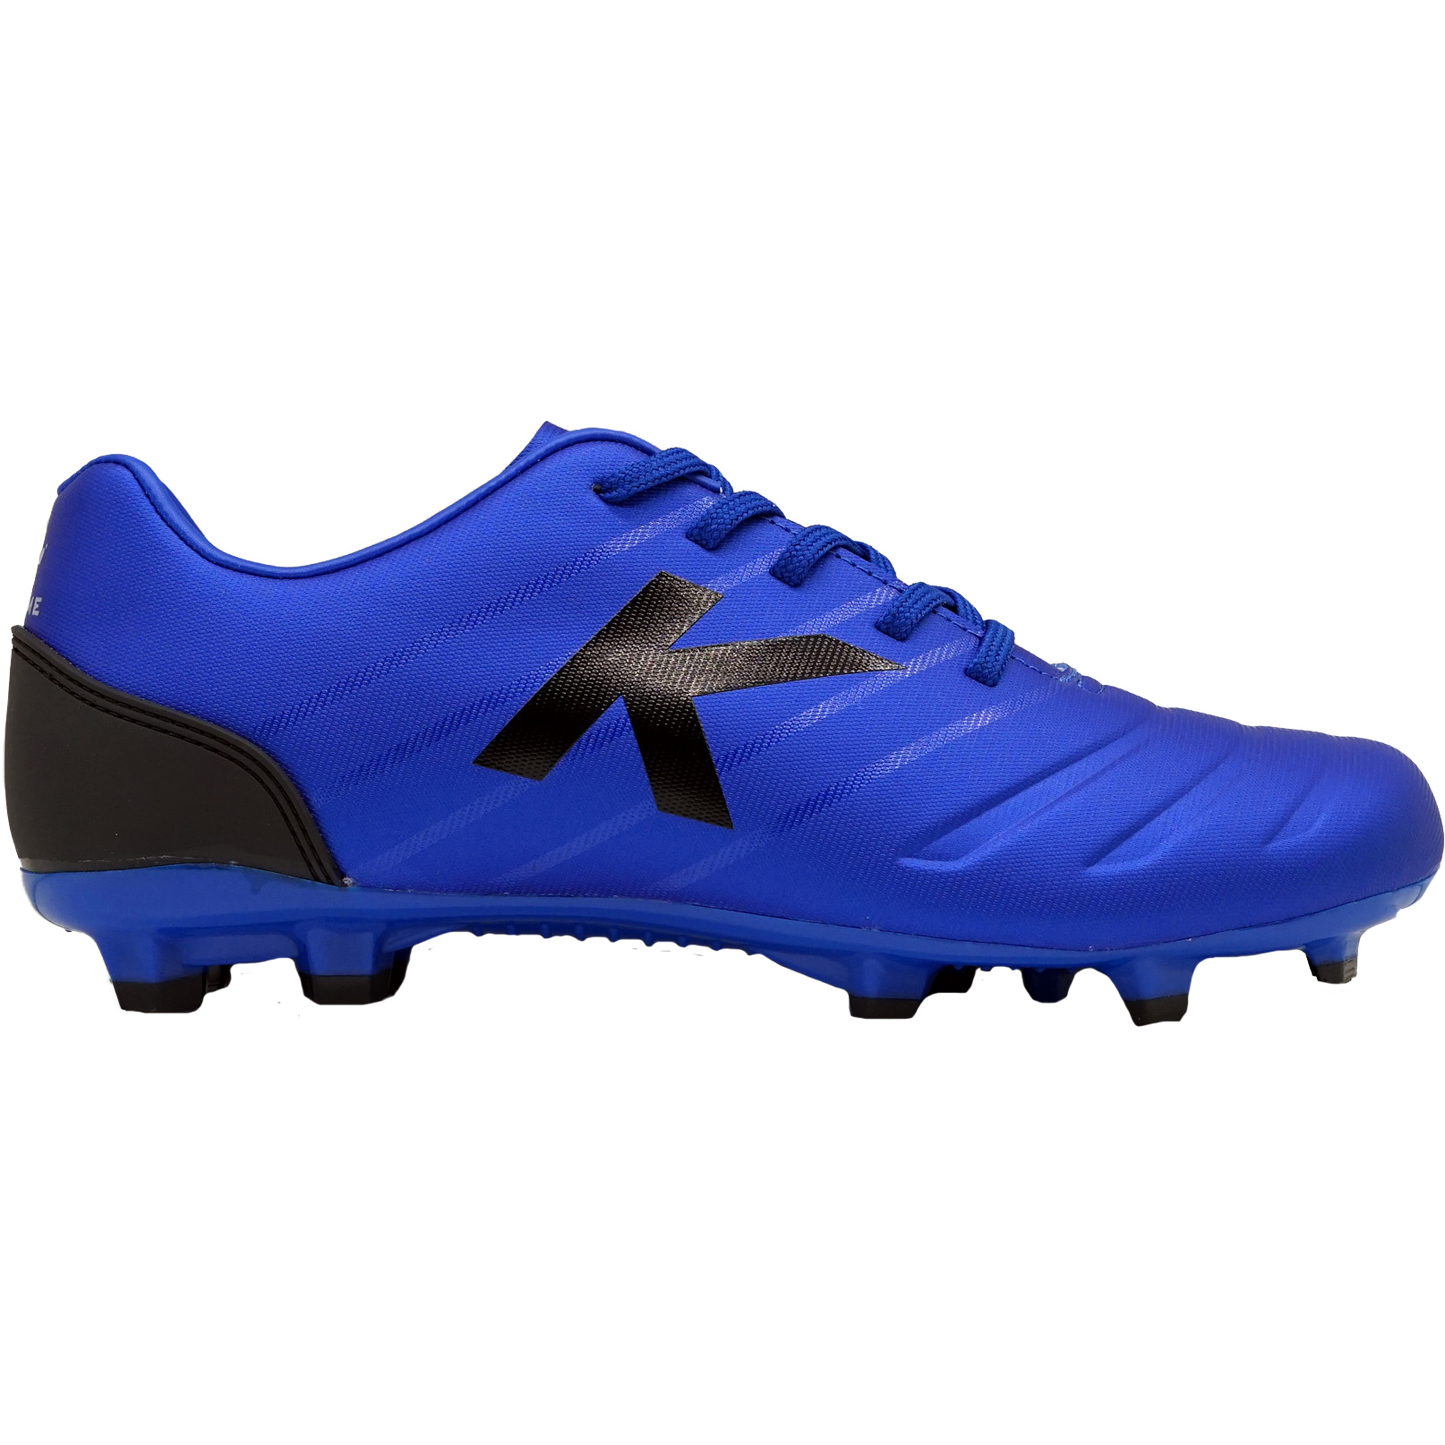 Neo FG Football Boots- Electric Blue